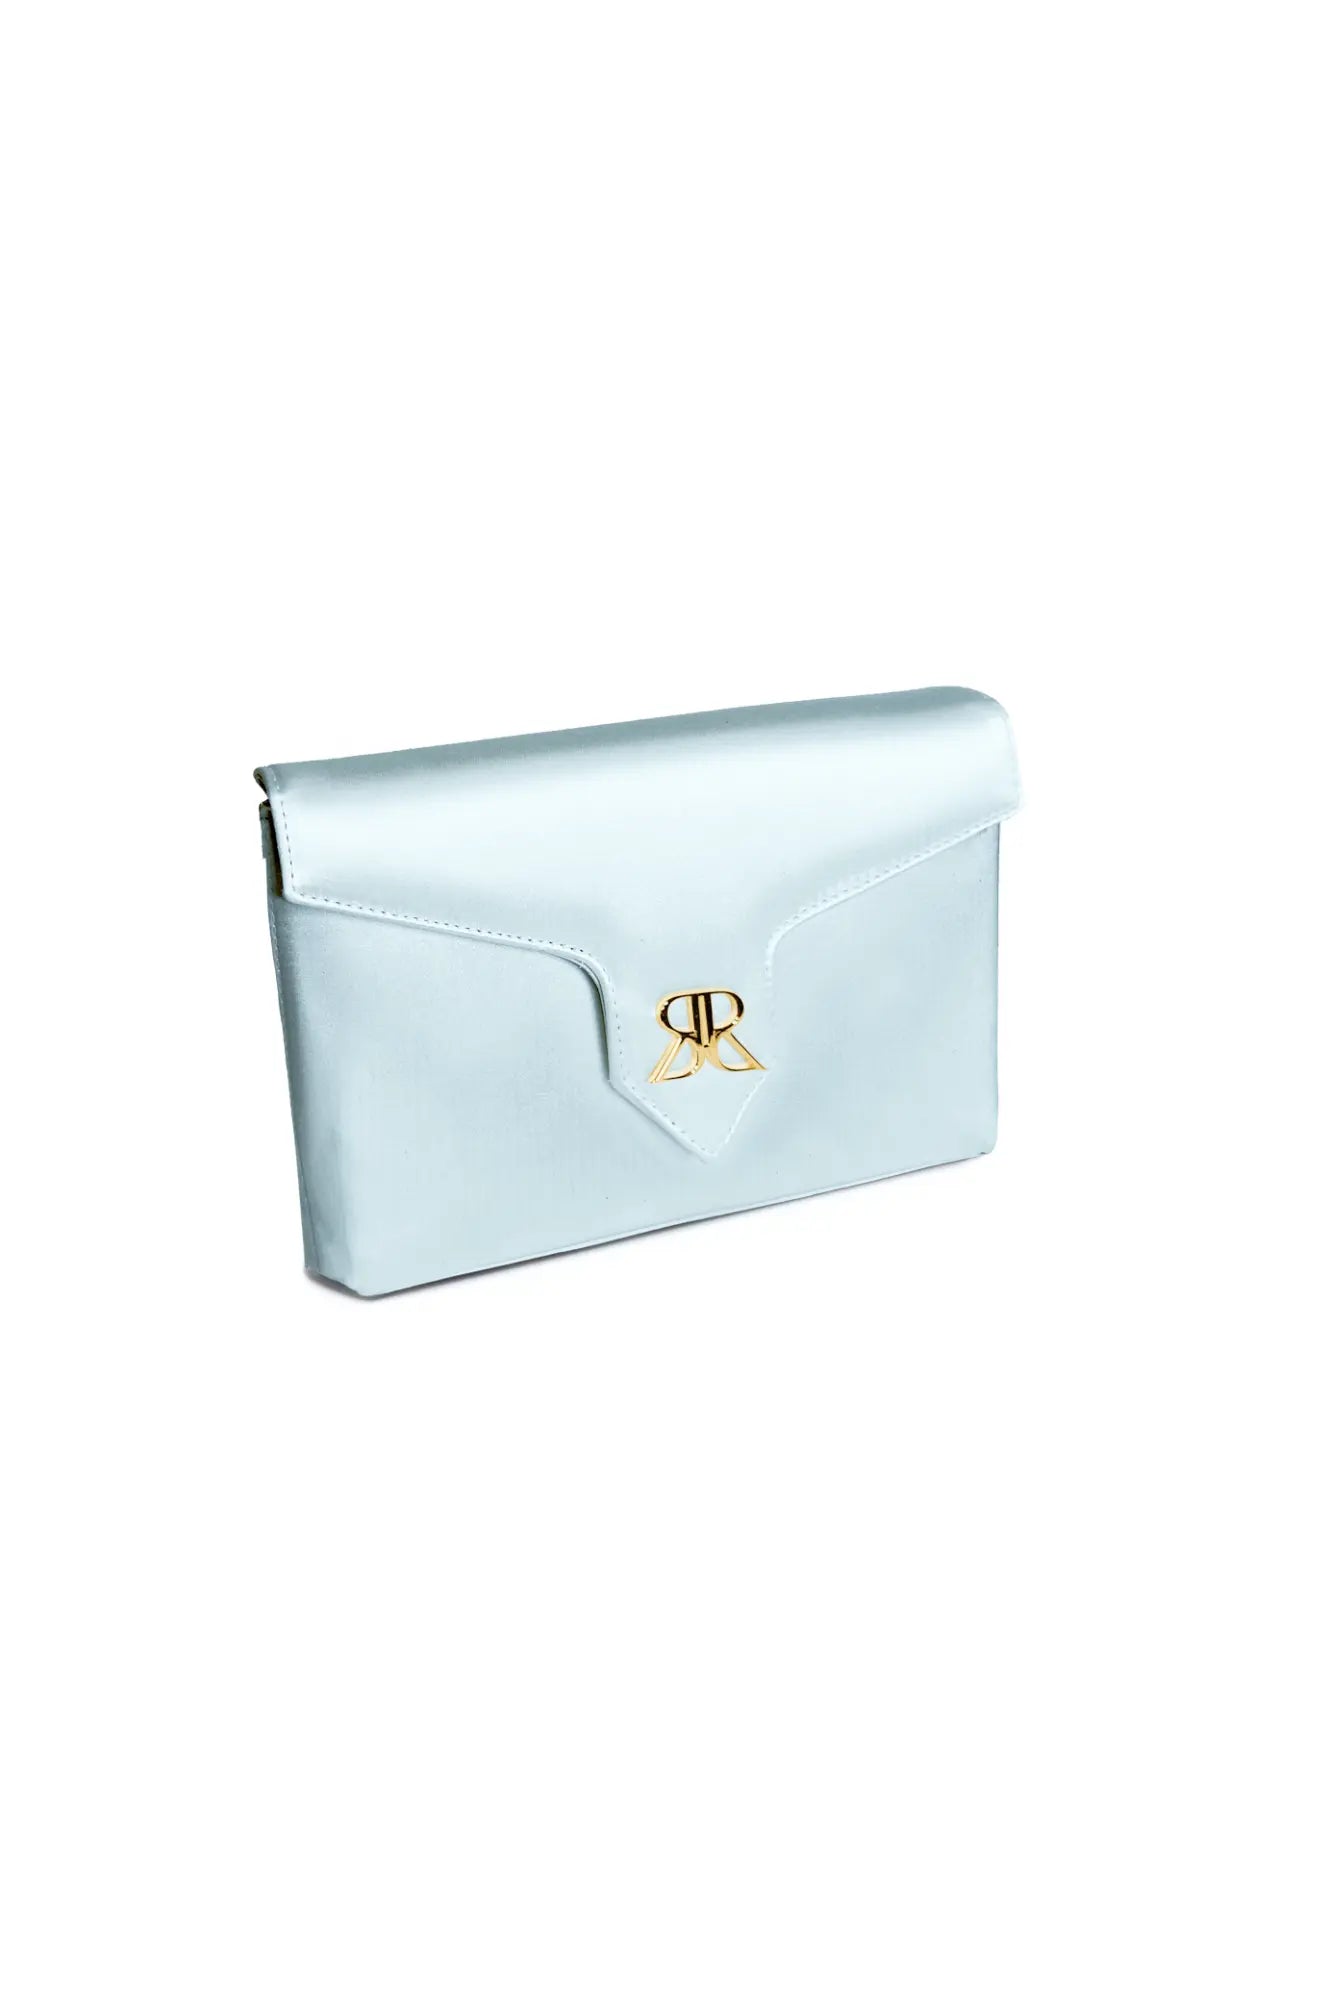 Light blue Love Note Envelope Clutch Cinderella Blue with a gold clasp against a white background transforms into an elegant evening navy satin clutch. - The Bella Rosa Collection